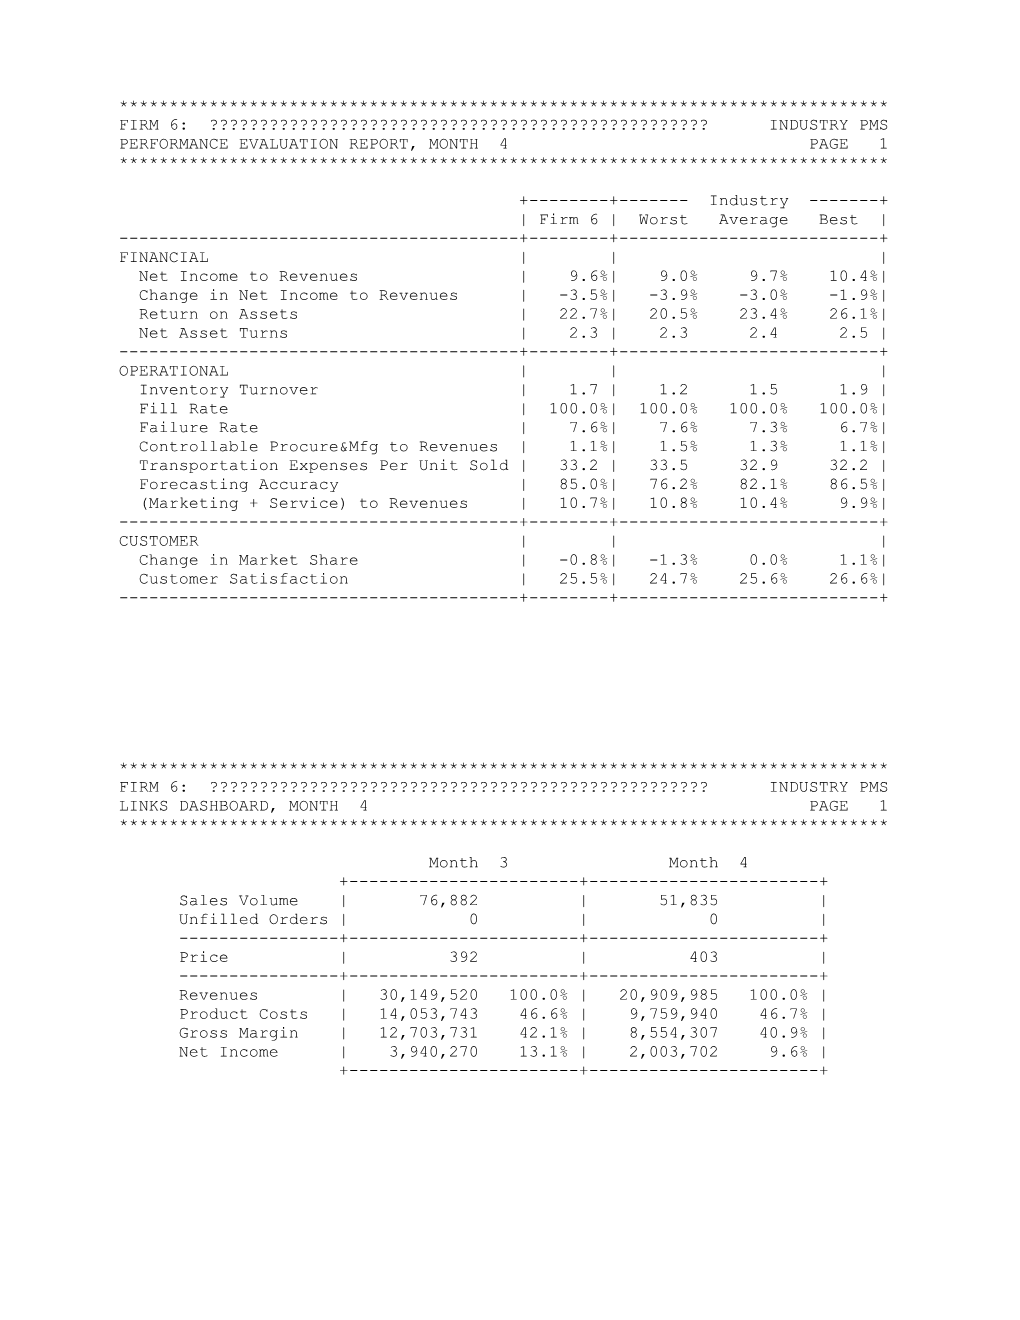 Performance Evaluation Report, Month 4 Page 1